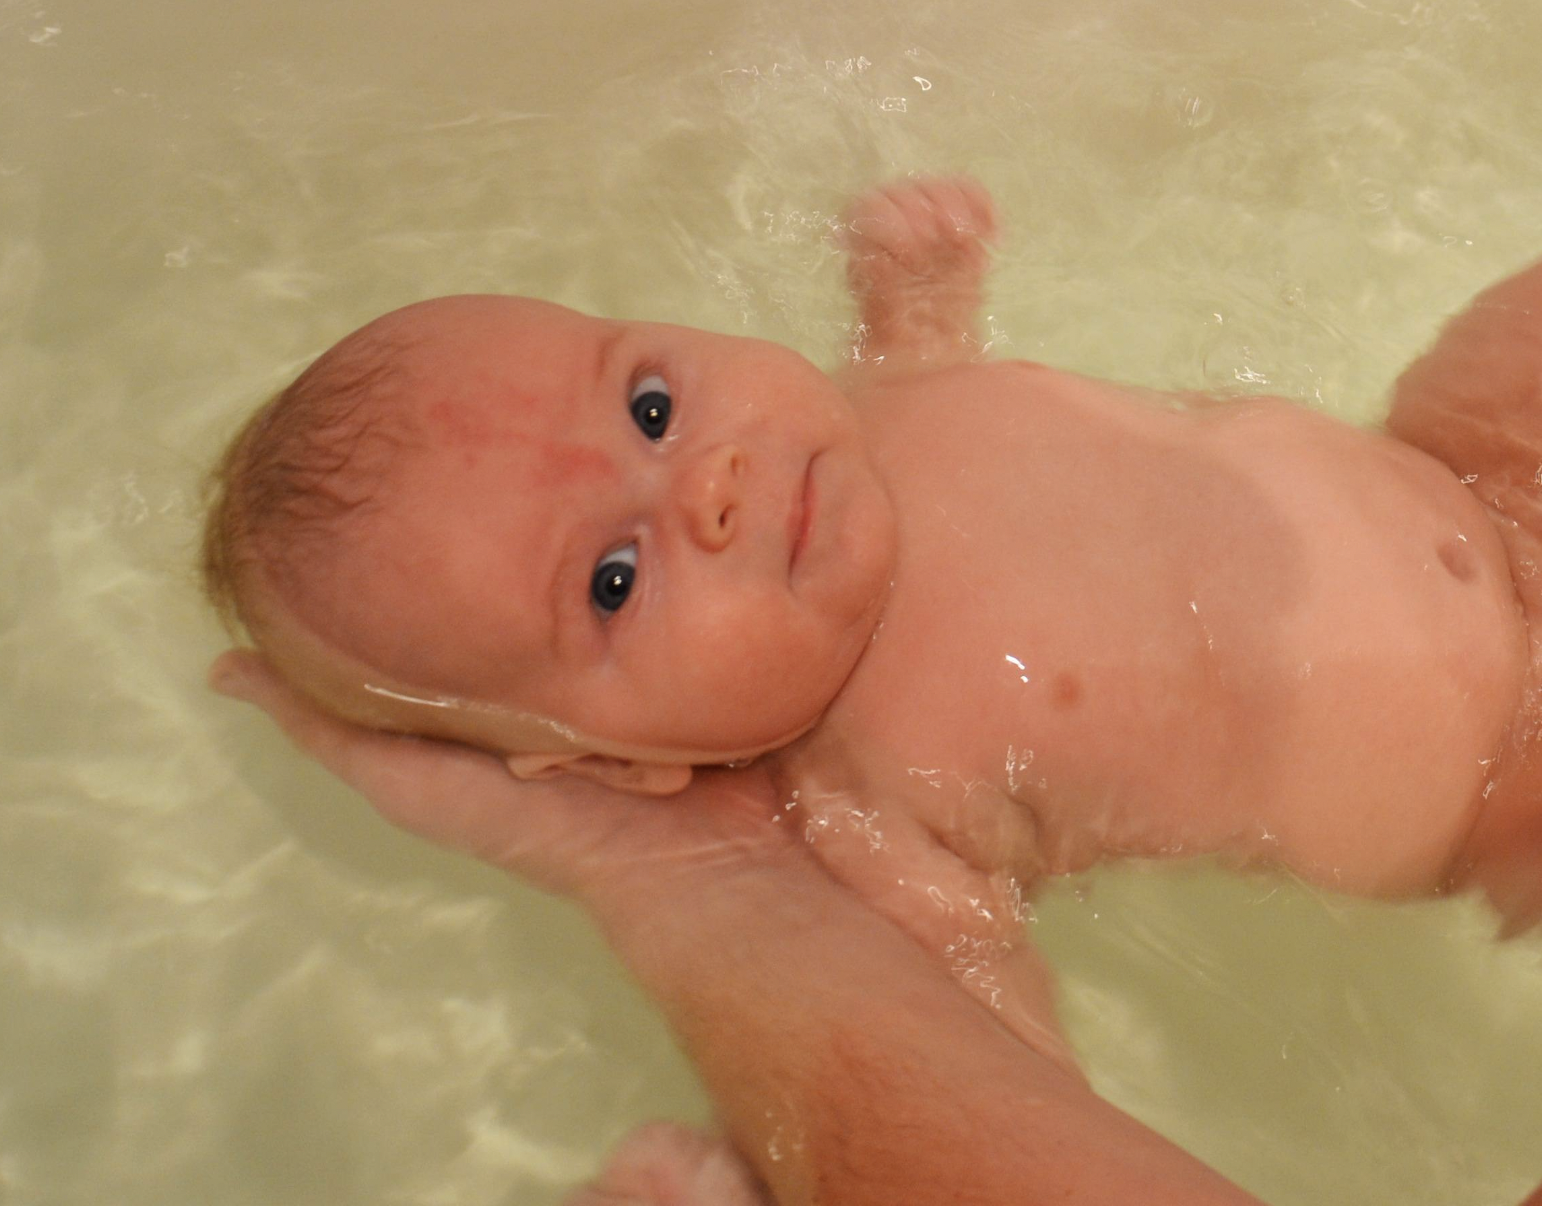 The baby is bathed in a bathtub | Source: Shutterstock